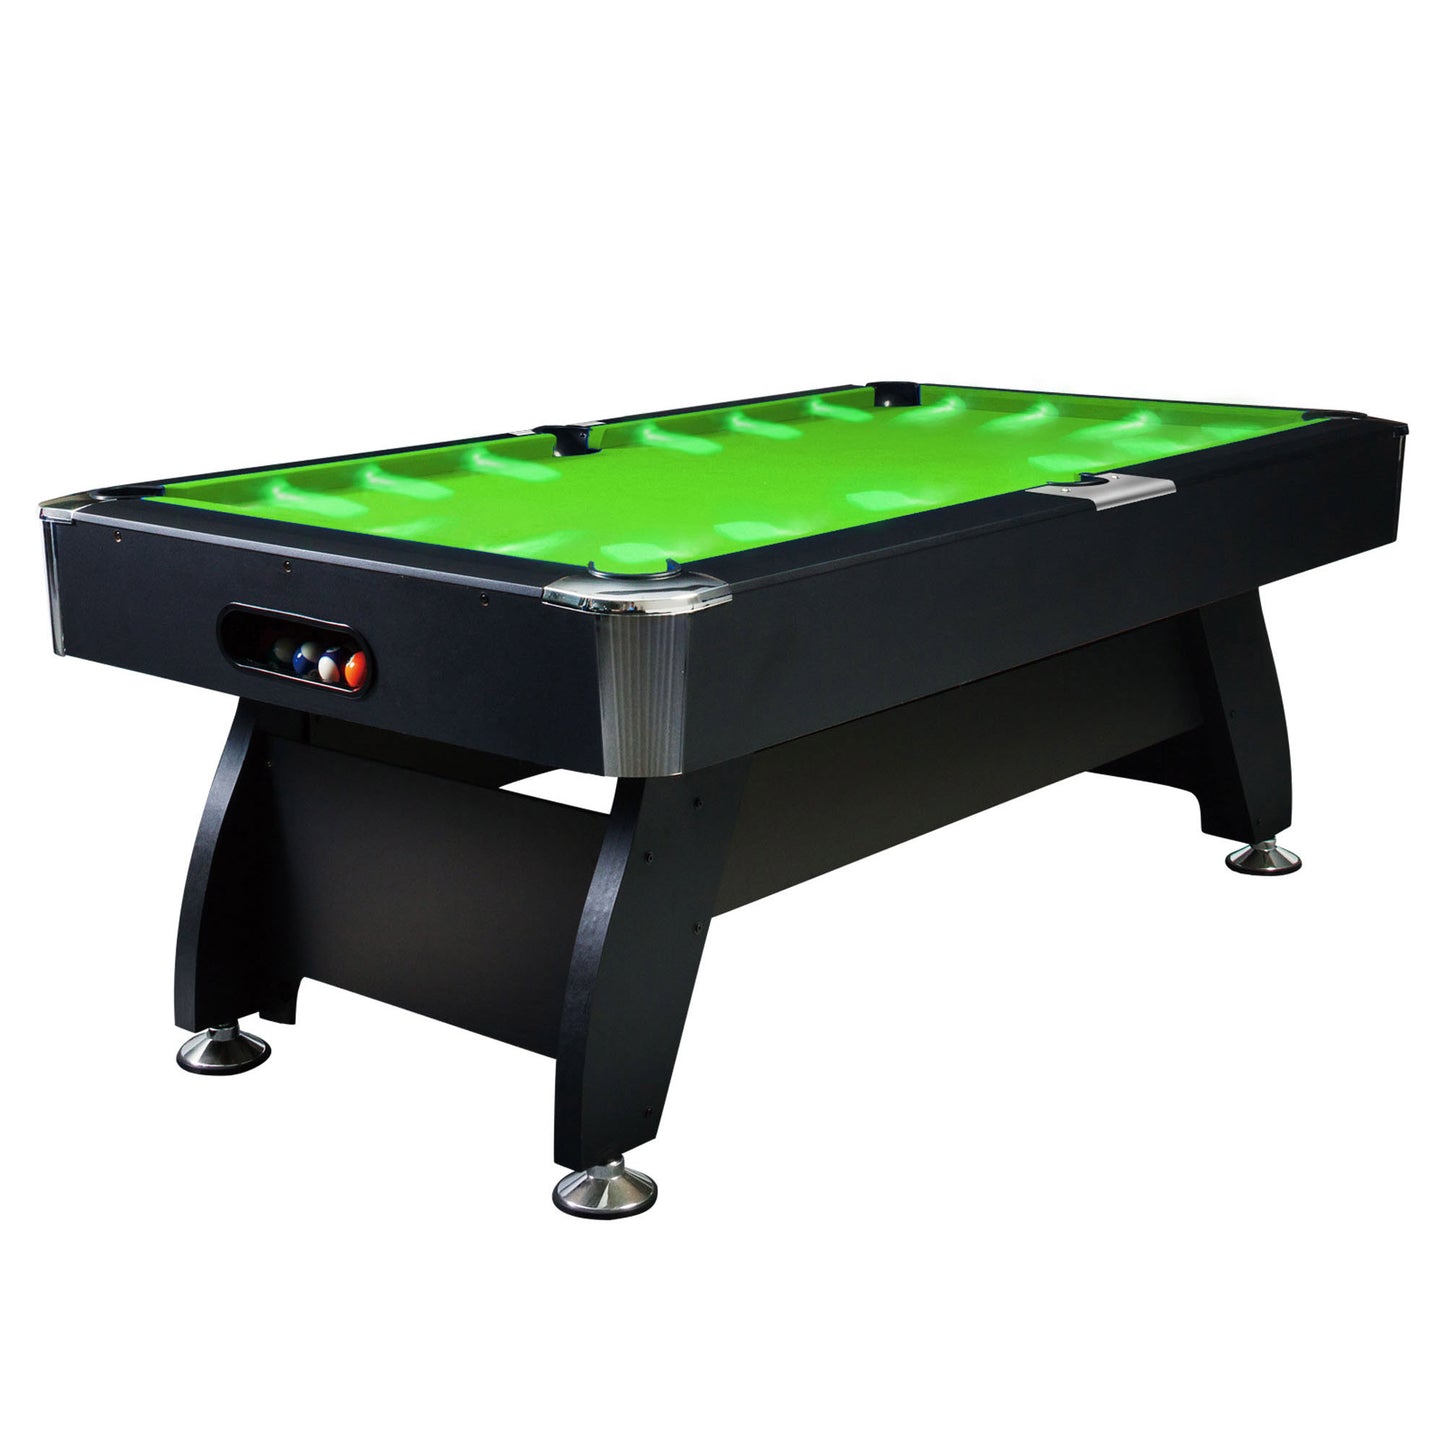 8FT LED Snooker Billiard Pool Table with Free Accessories - Green